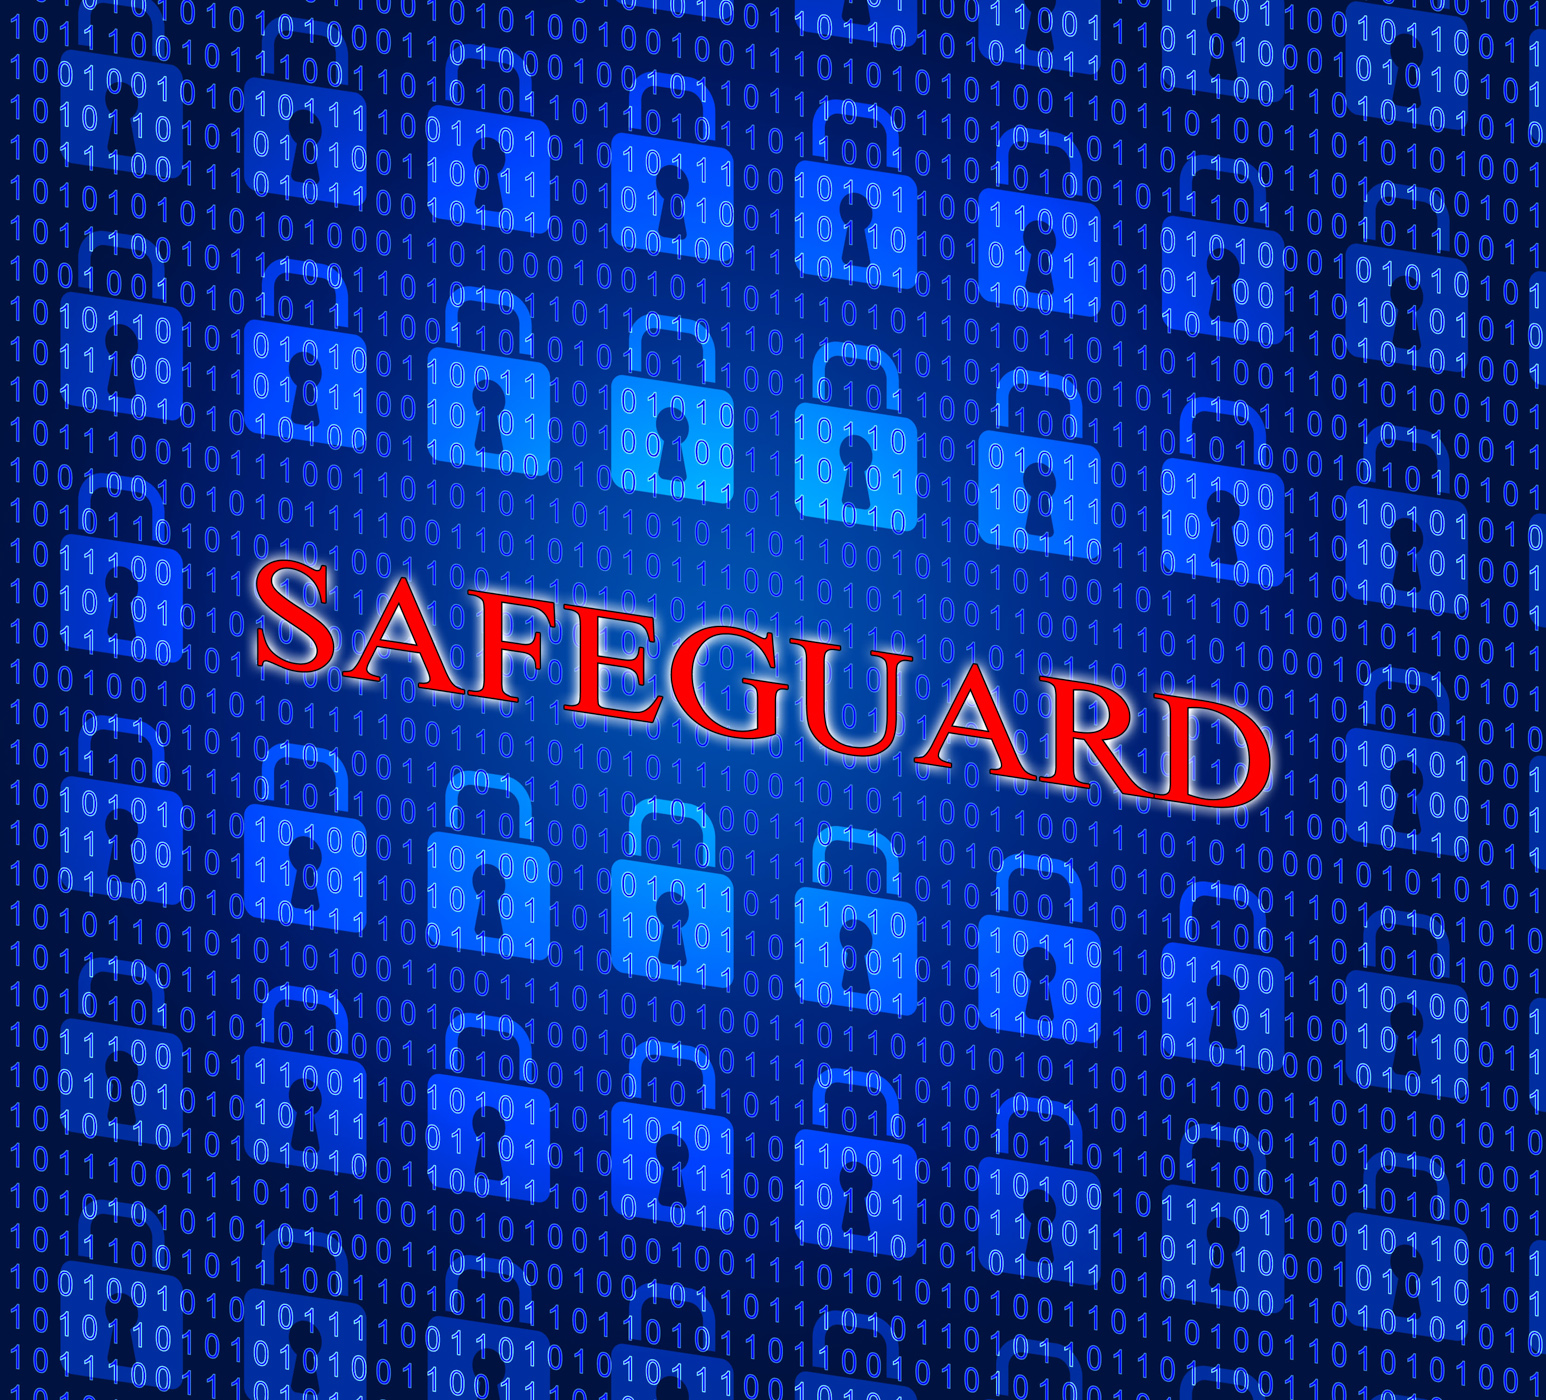 Safeguard safety represents privacy key and protected photo